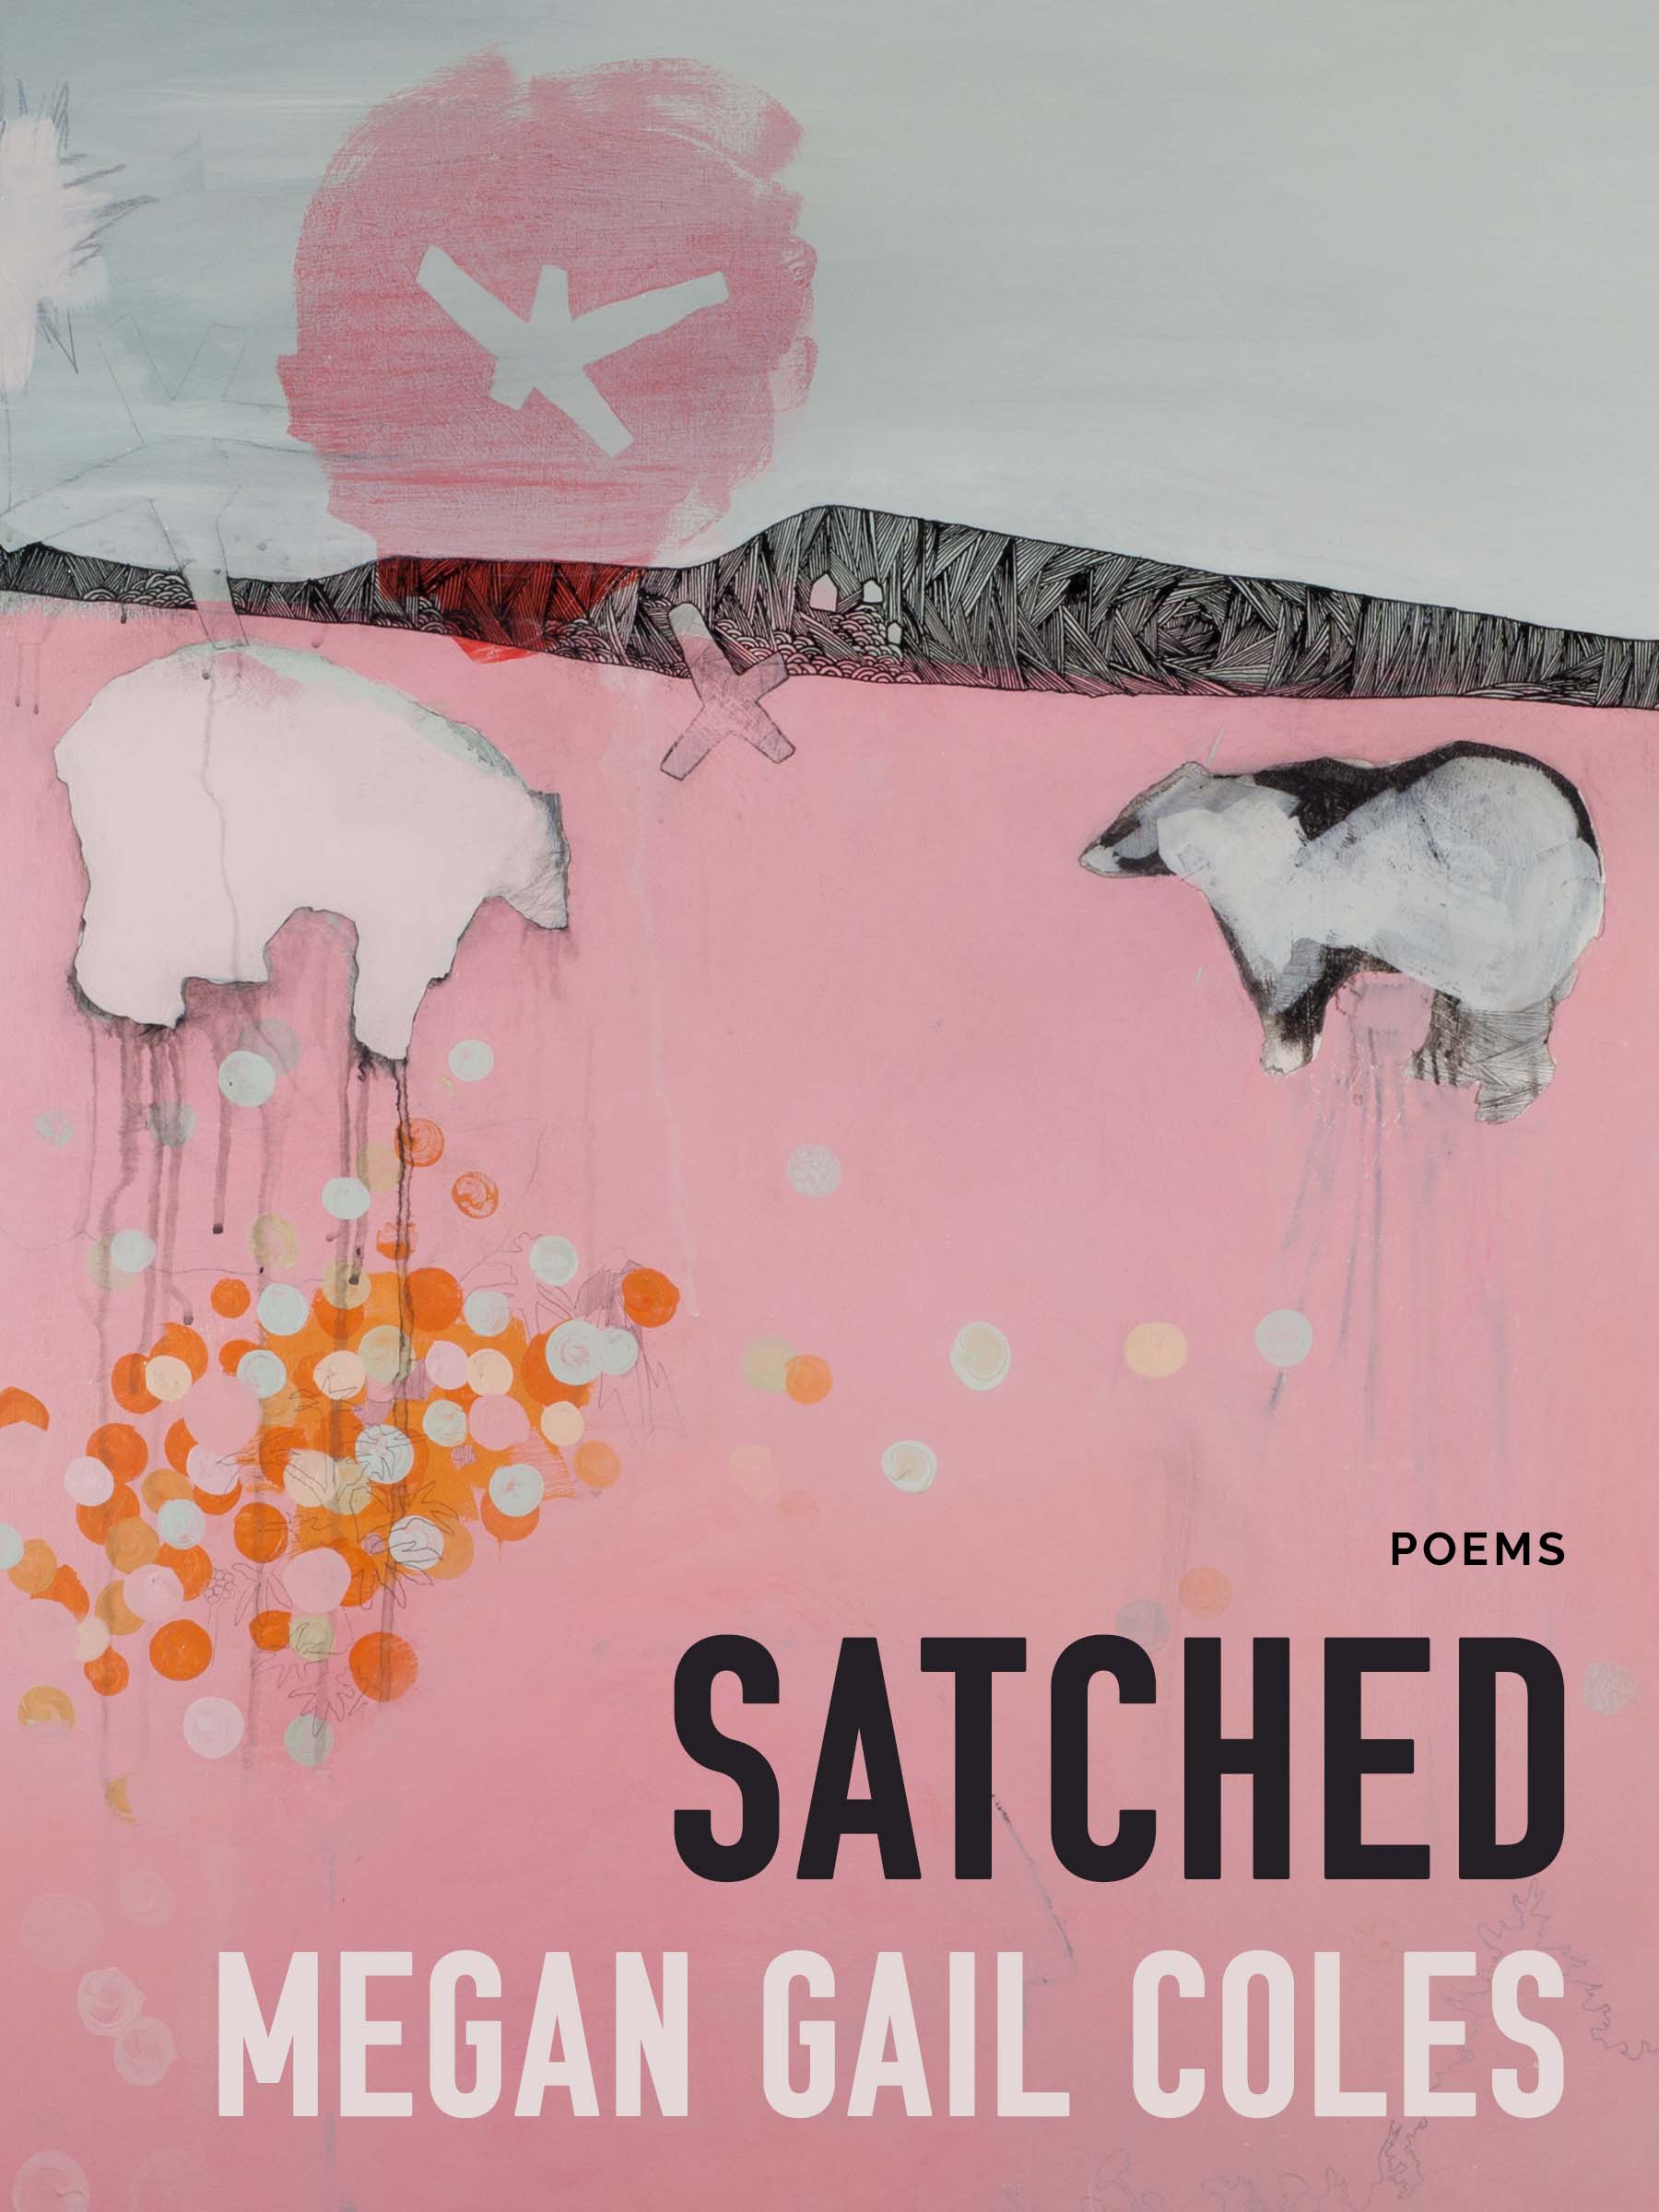 Review of  “Satched” by Megan Gail Coles